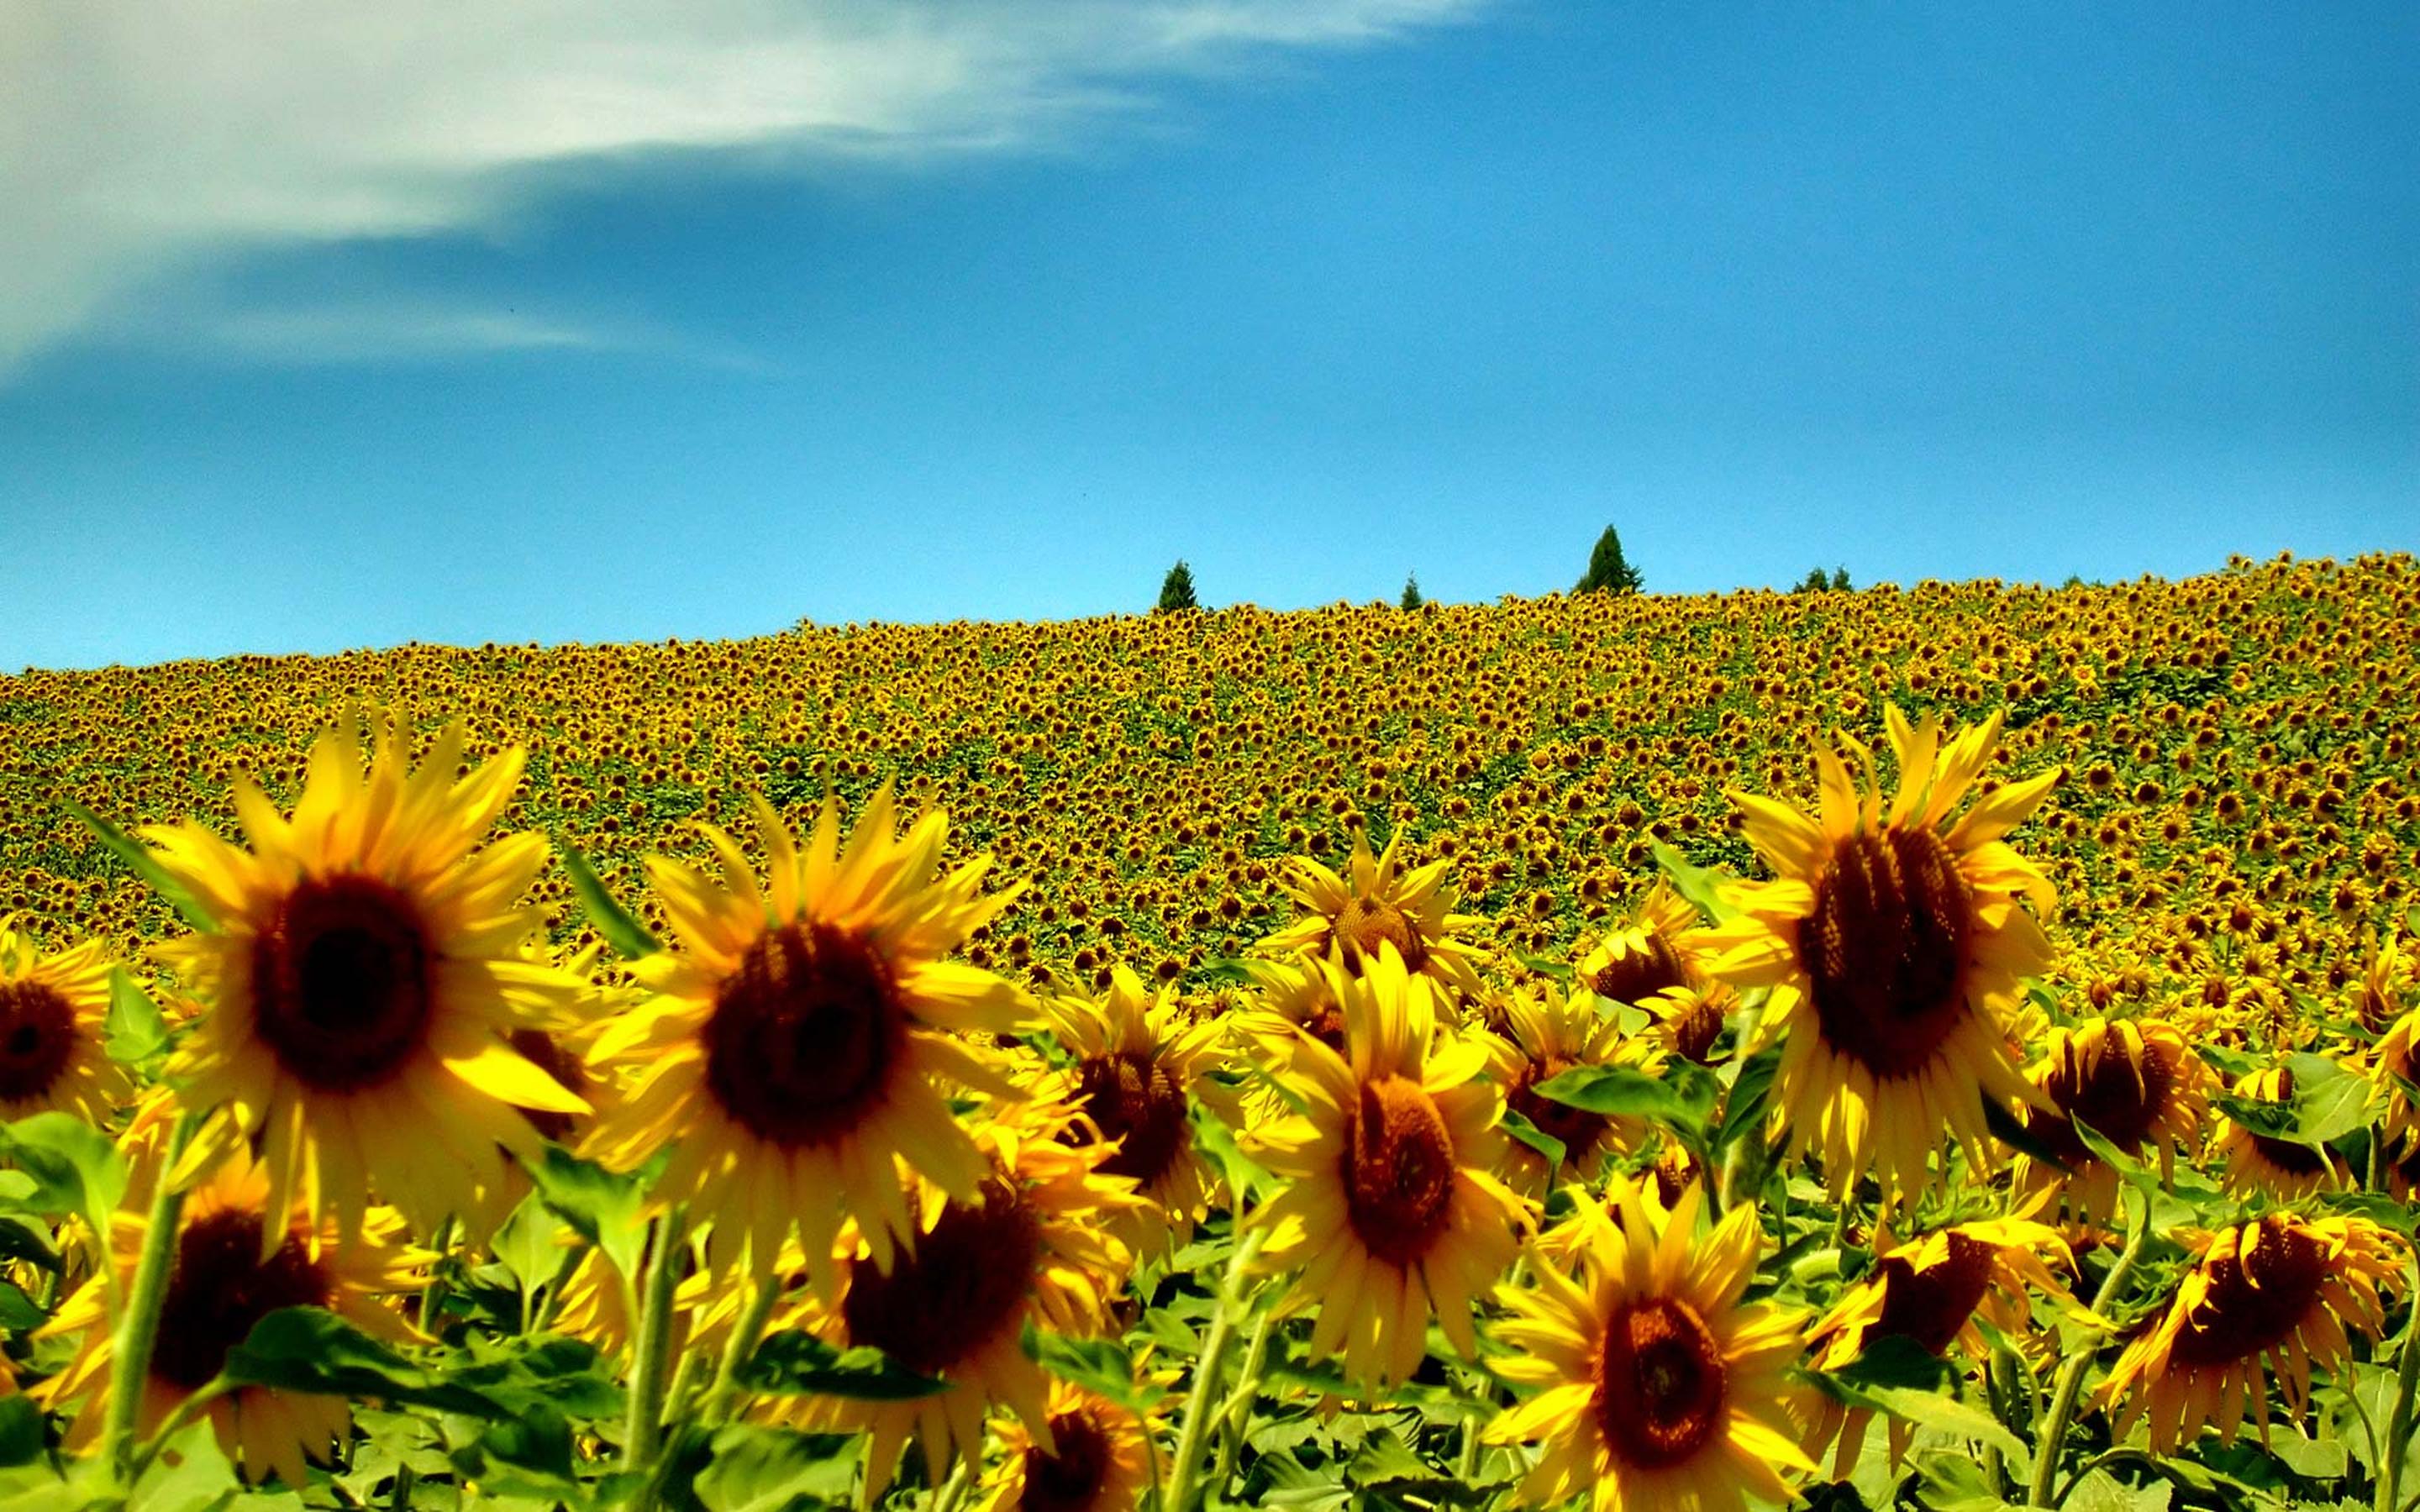 Field full with sunflowers summer time